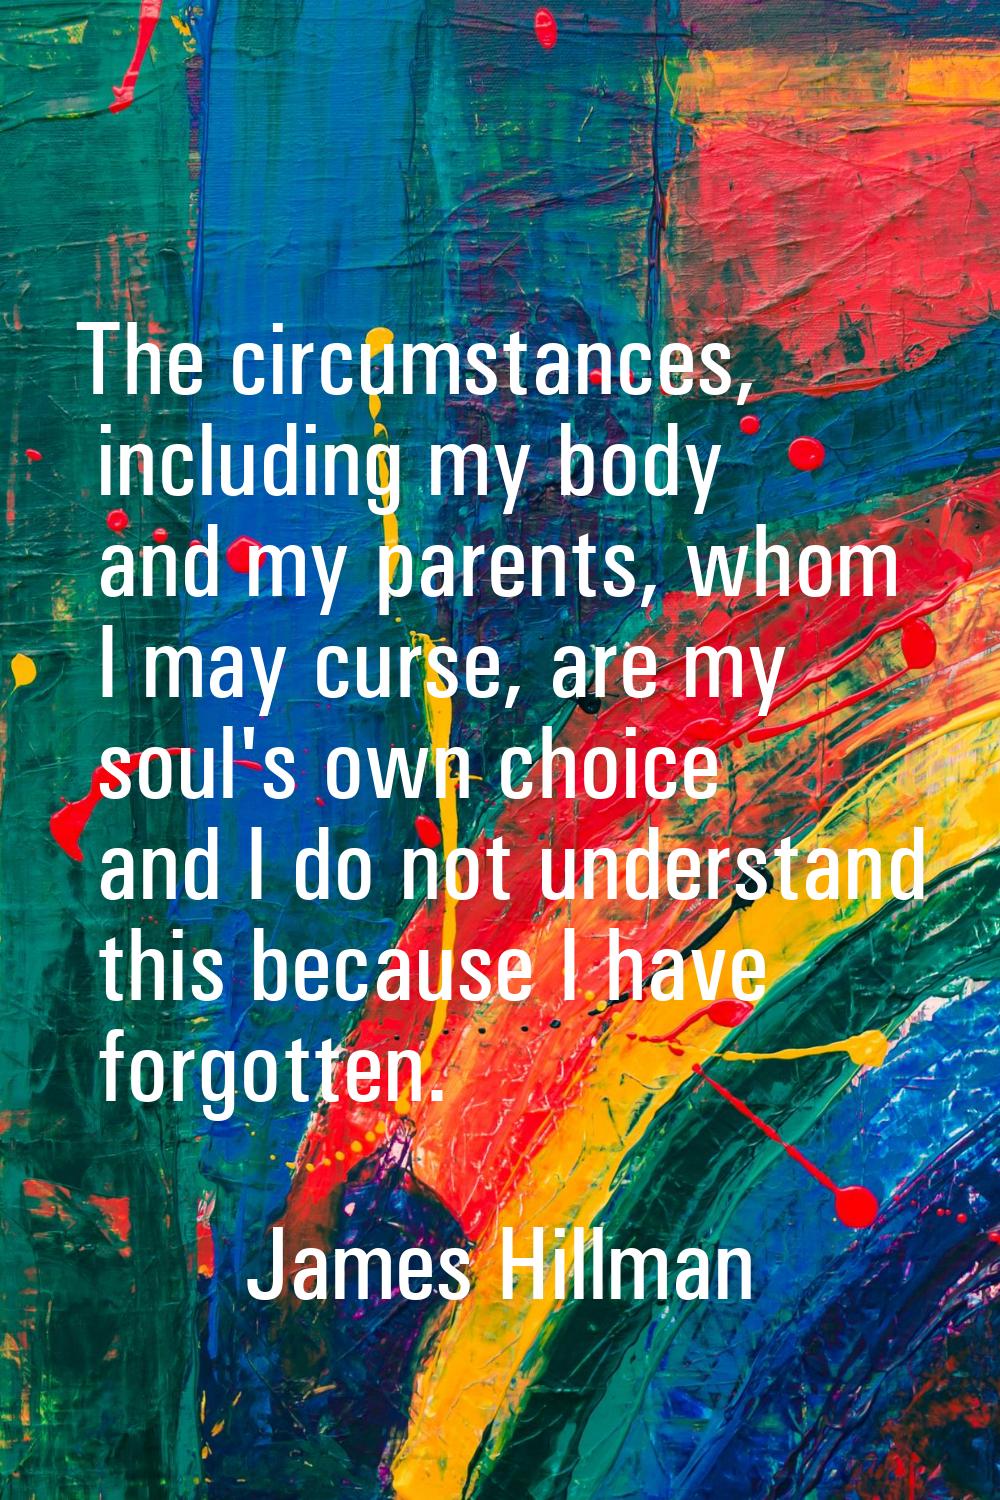 The circumstances, including my body and my parents, whom I may curse, are my soul's own choice and